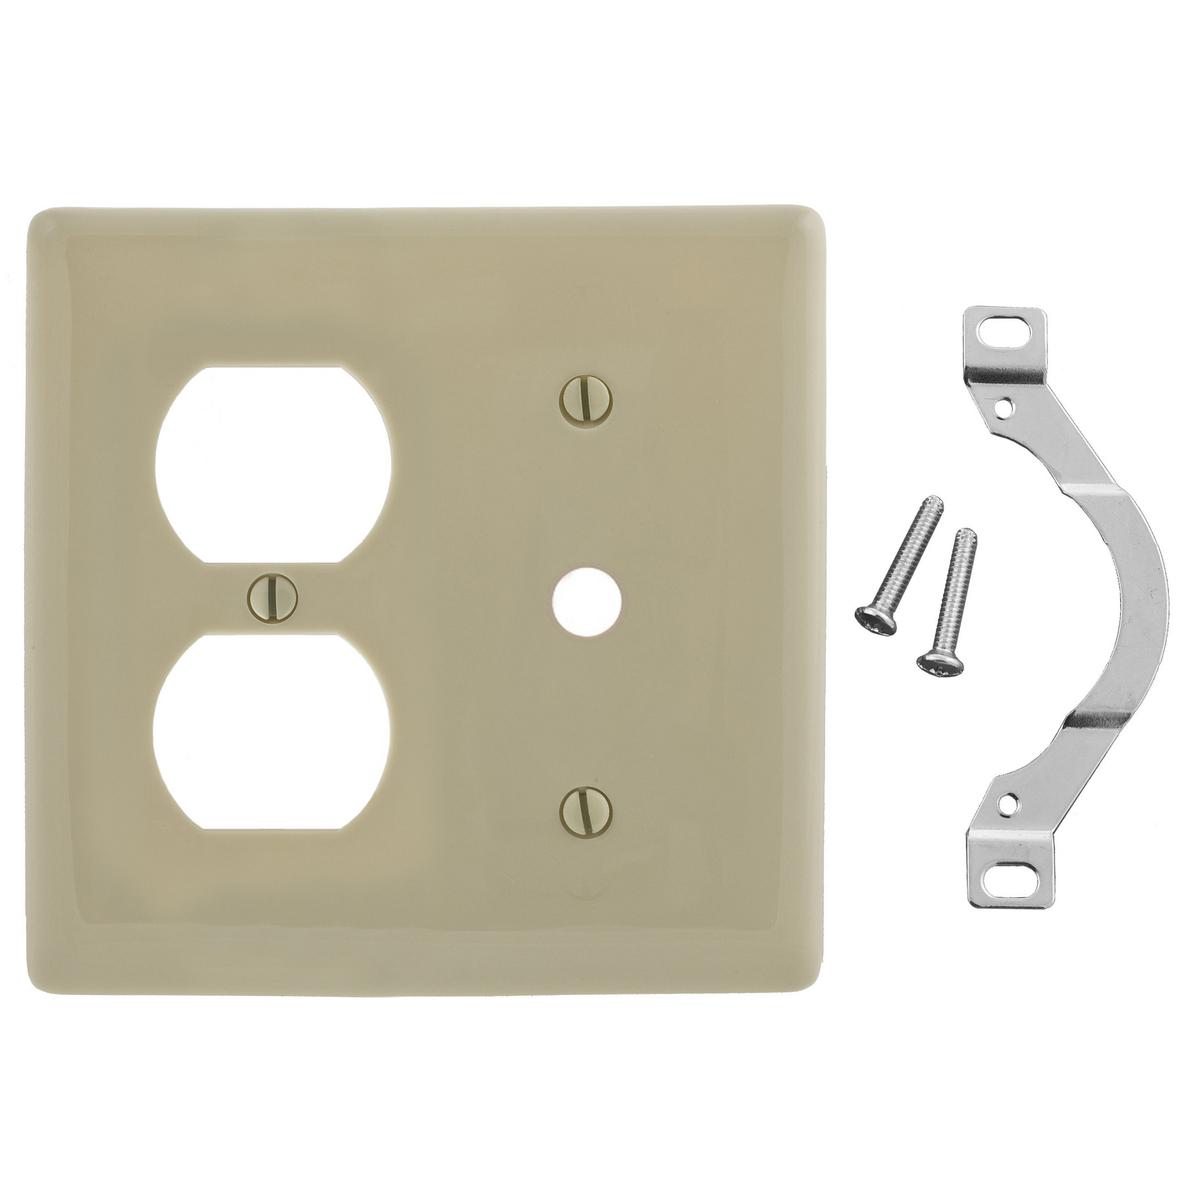 Hubbell NP128I Wallplates and Box Covers, Wallplate, Nylon, 2-Gang, 1) Duplex 1) .406" Opening, Ivory  ; Reinforcement ribs for extra strength ; High-impact, self-extinguishing nylon material ; Captive screw feature holds mounting screw in place ; Standard Size is 1/8" 